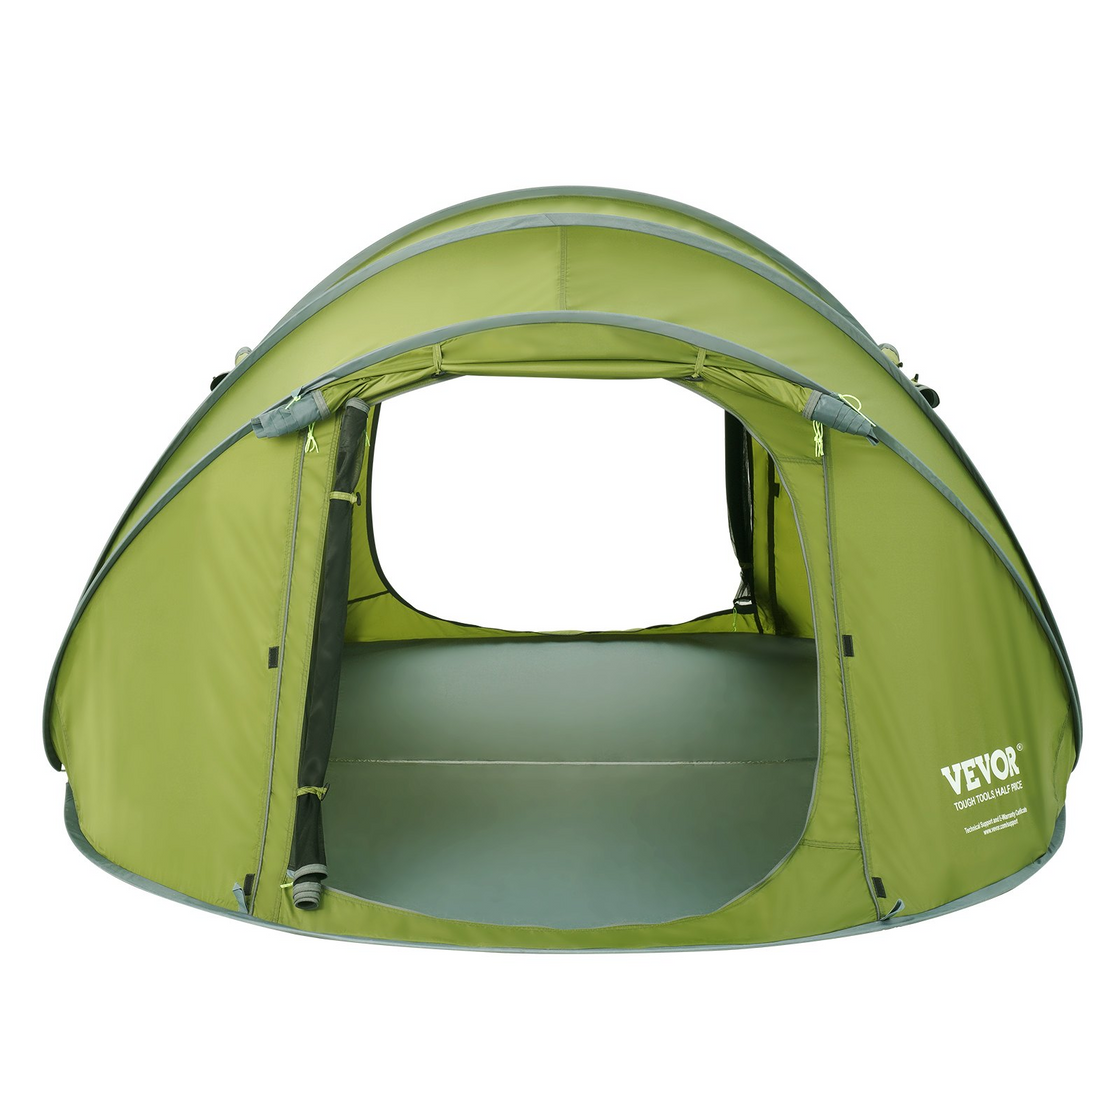 VEVOR Camping Tent - Easy Setup, Waterproof, 9.2 x 6.6 ft Pop Up Tent for 4 Person, with Door and Window - Perfect for Outdoor Family Camping, Hiking, and Hunting